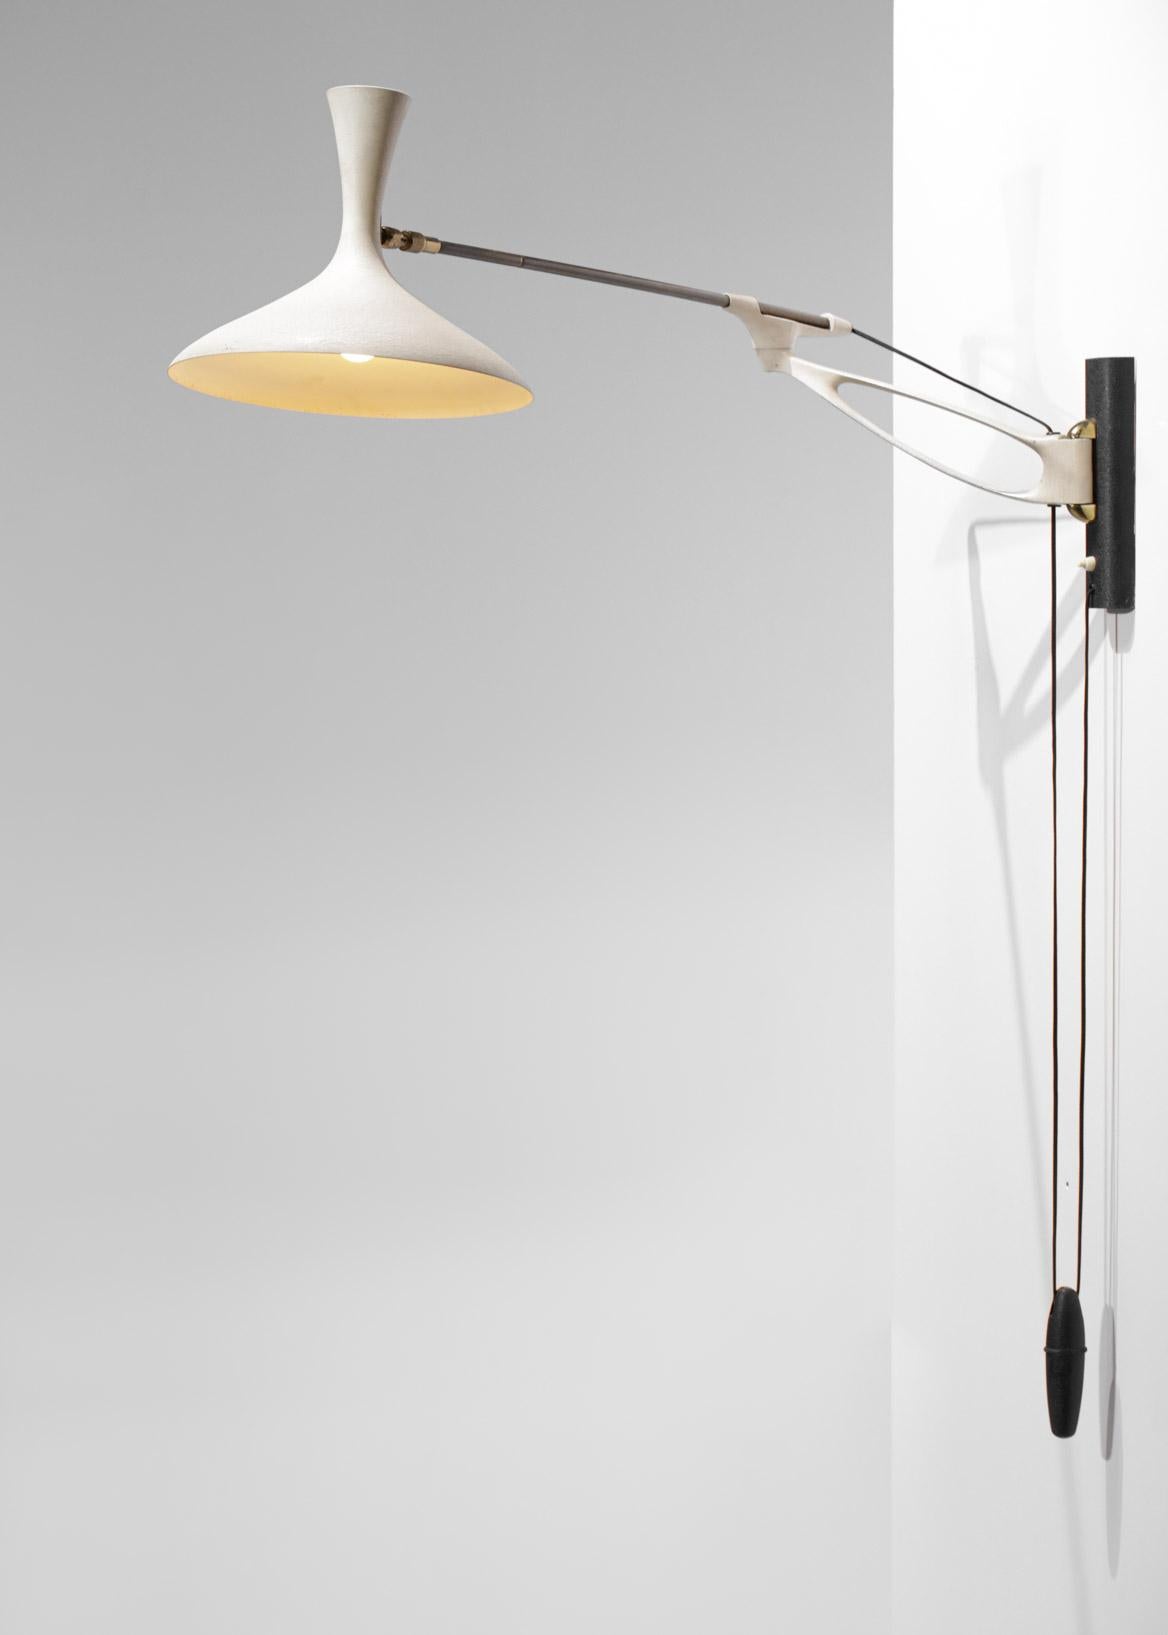 German telescopic lamp from the 50's by the designer Cosack Leutchen. The arm, counterweight and shade are made of black or beige lacquered metal. The system of counterweight and pulley allows to modulate the length of the gallows, possibility to